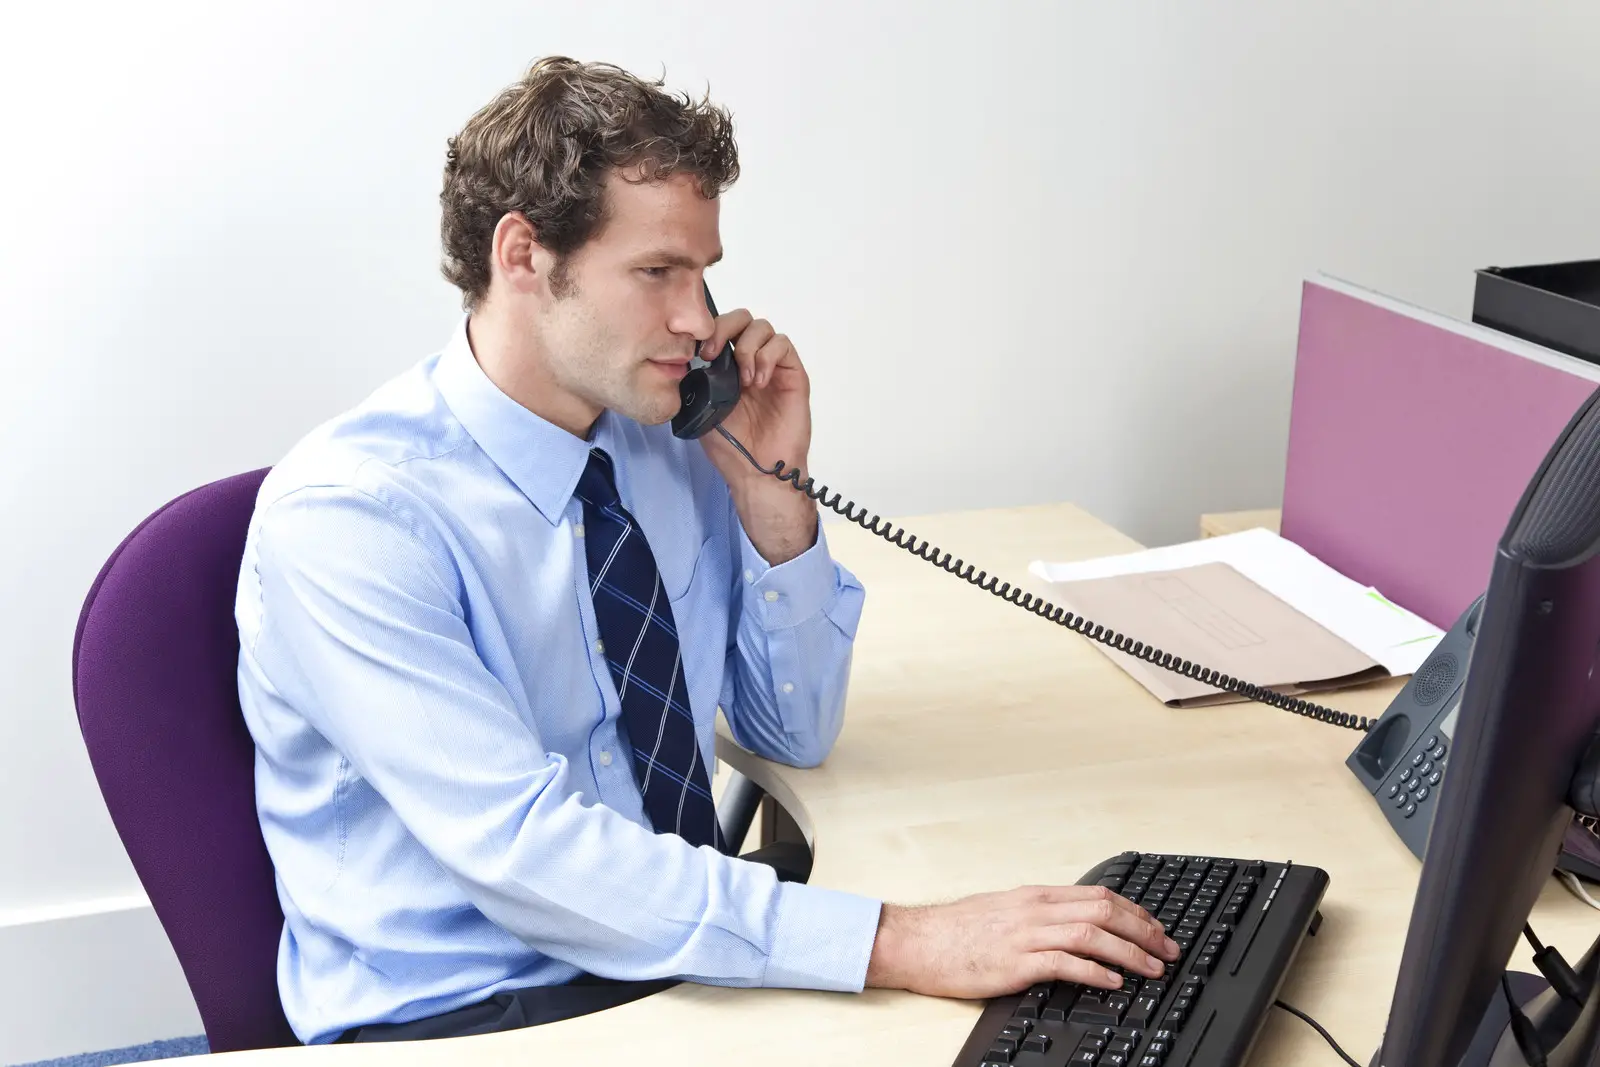 Salesman sitting at desk on the phone typing on the computer-represents an insurance agent attempting to sell upgraded life insurance policies